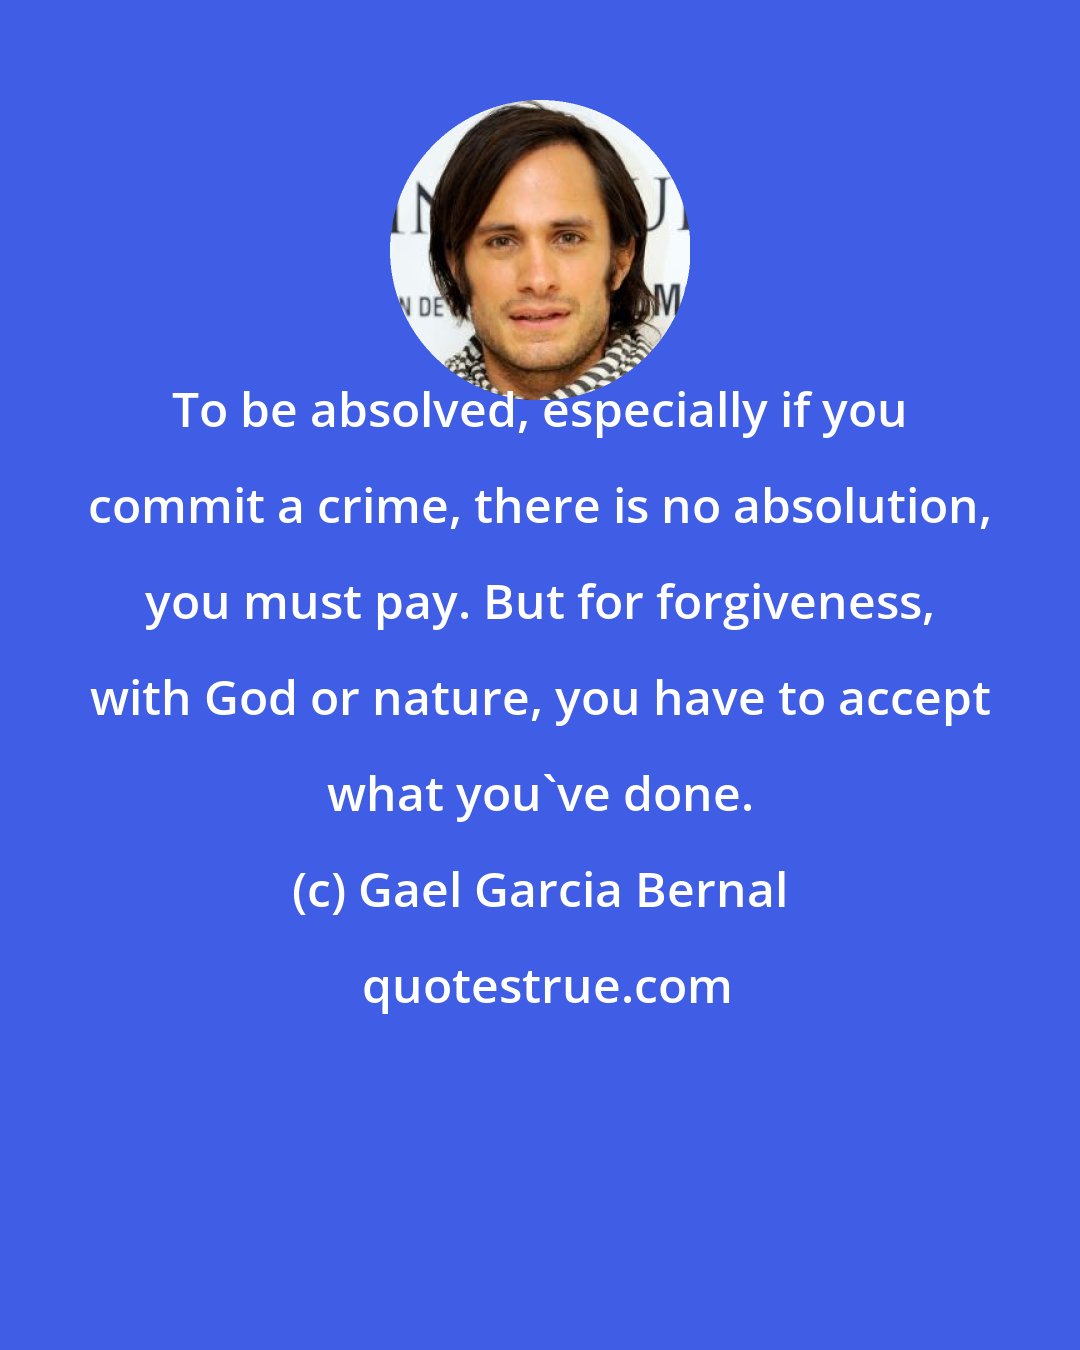 Gael Garcia Bernal: To be absolved, especially if you commit a crime, there is no absolution, you must pay. But for forgiveness, with God or nature, you have to accept what you've done.